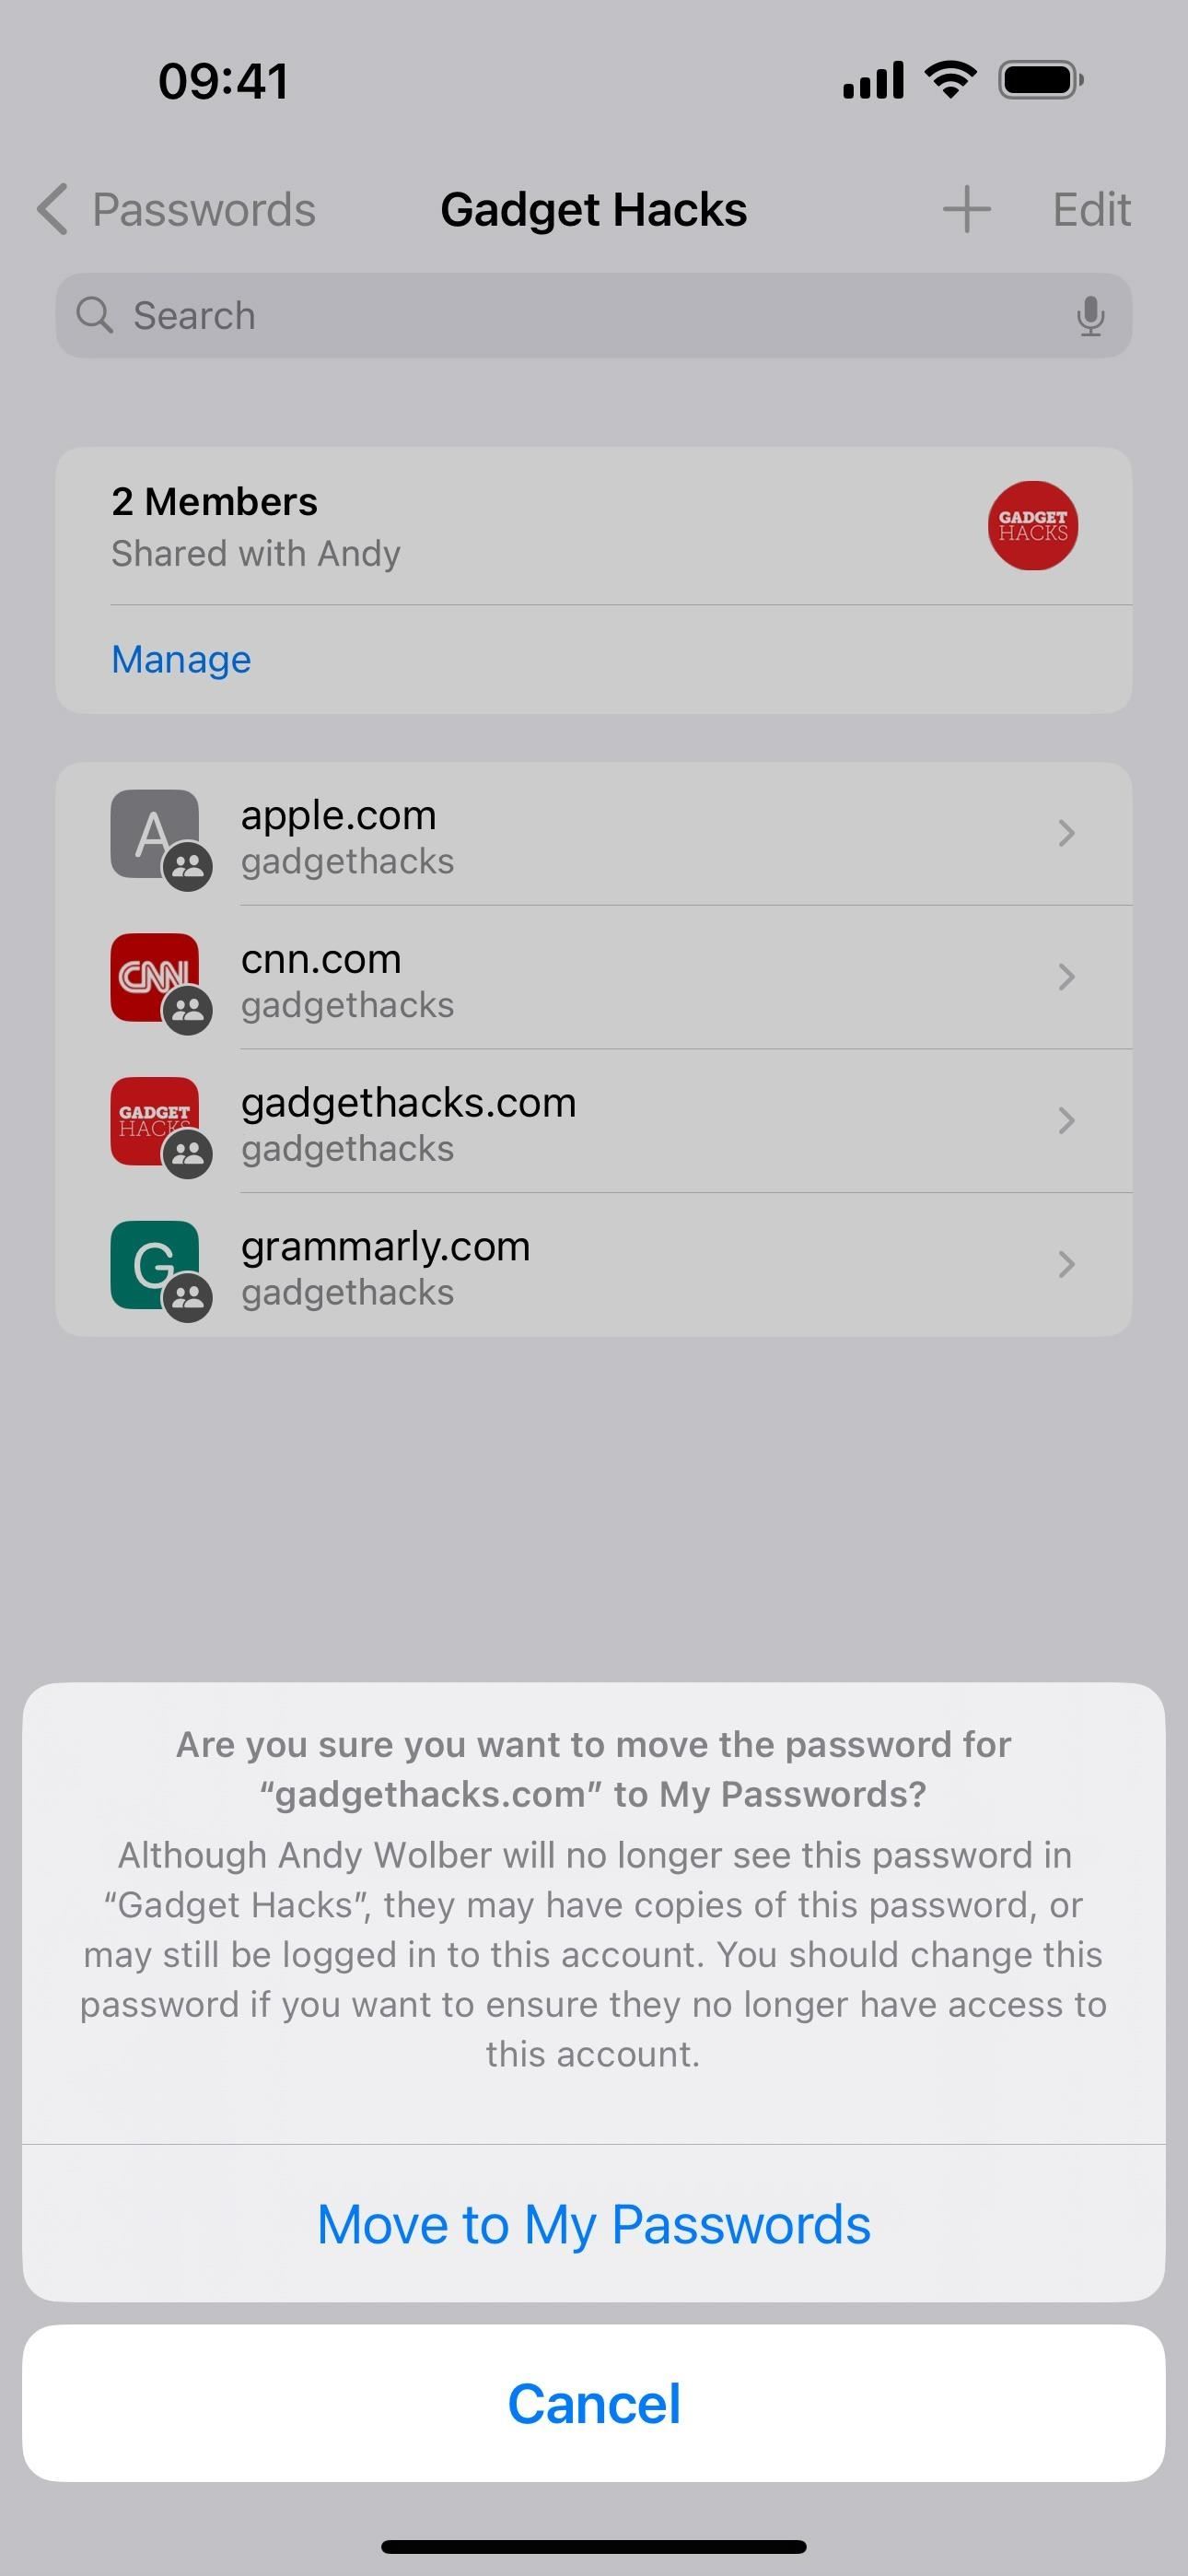 How to Share Account Passwords or Passkeys with People You Trust Easily from Your iPhone, iPad, or Mac